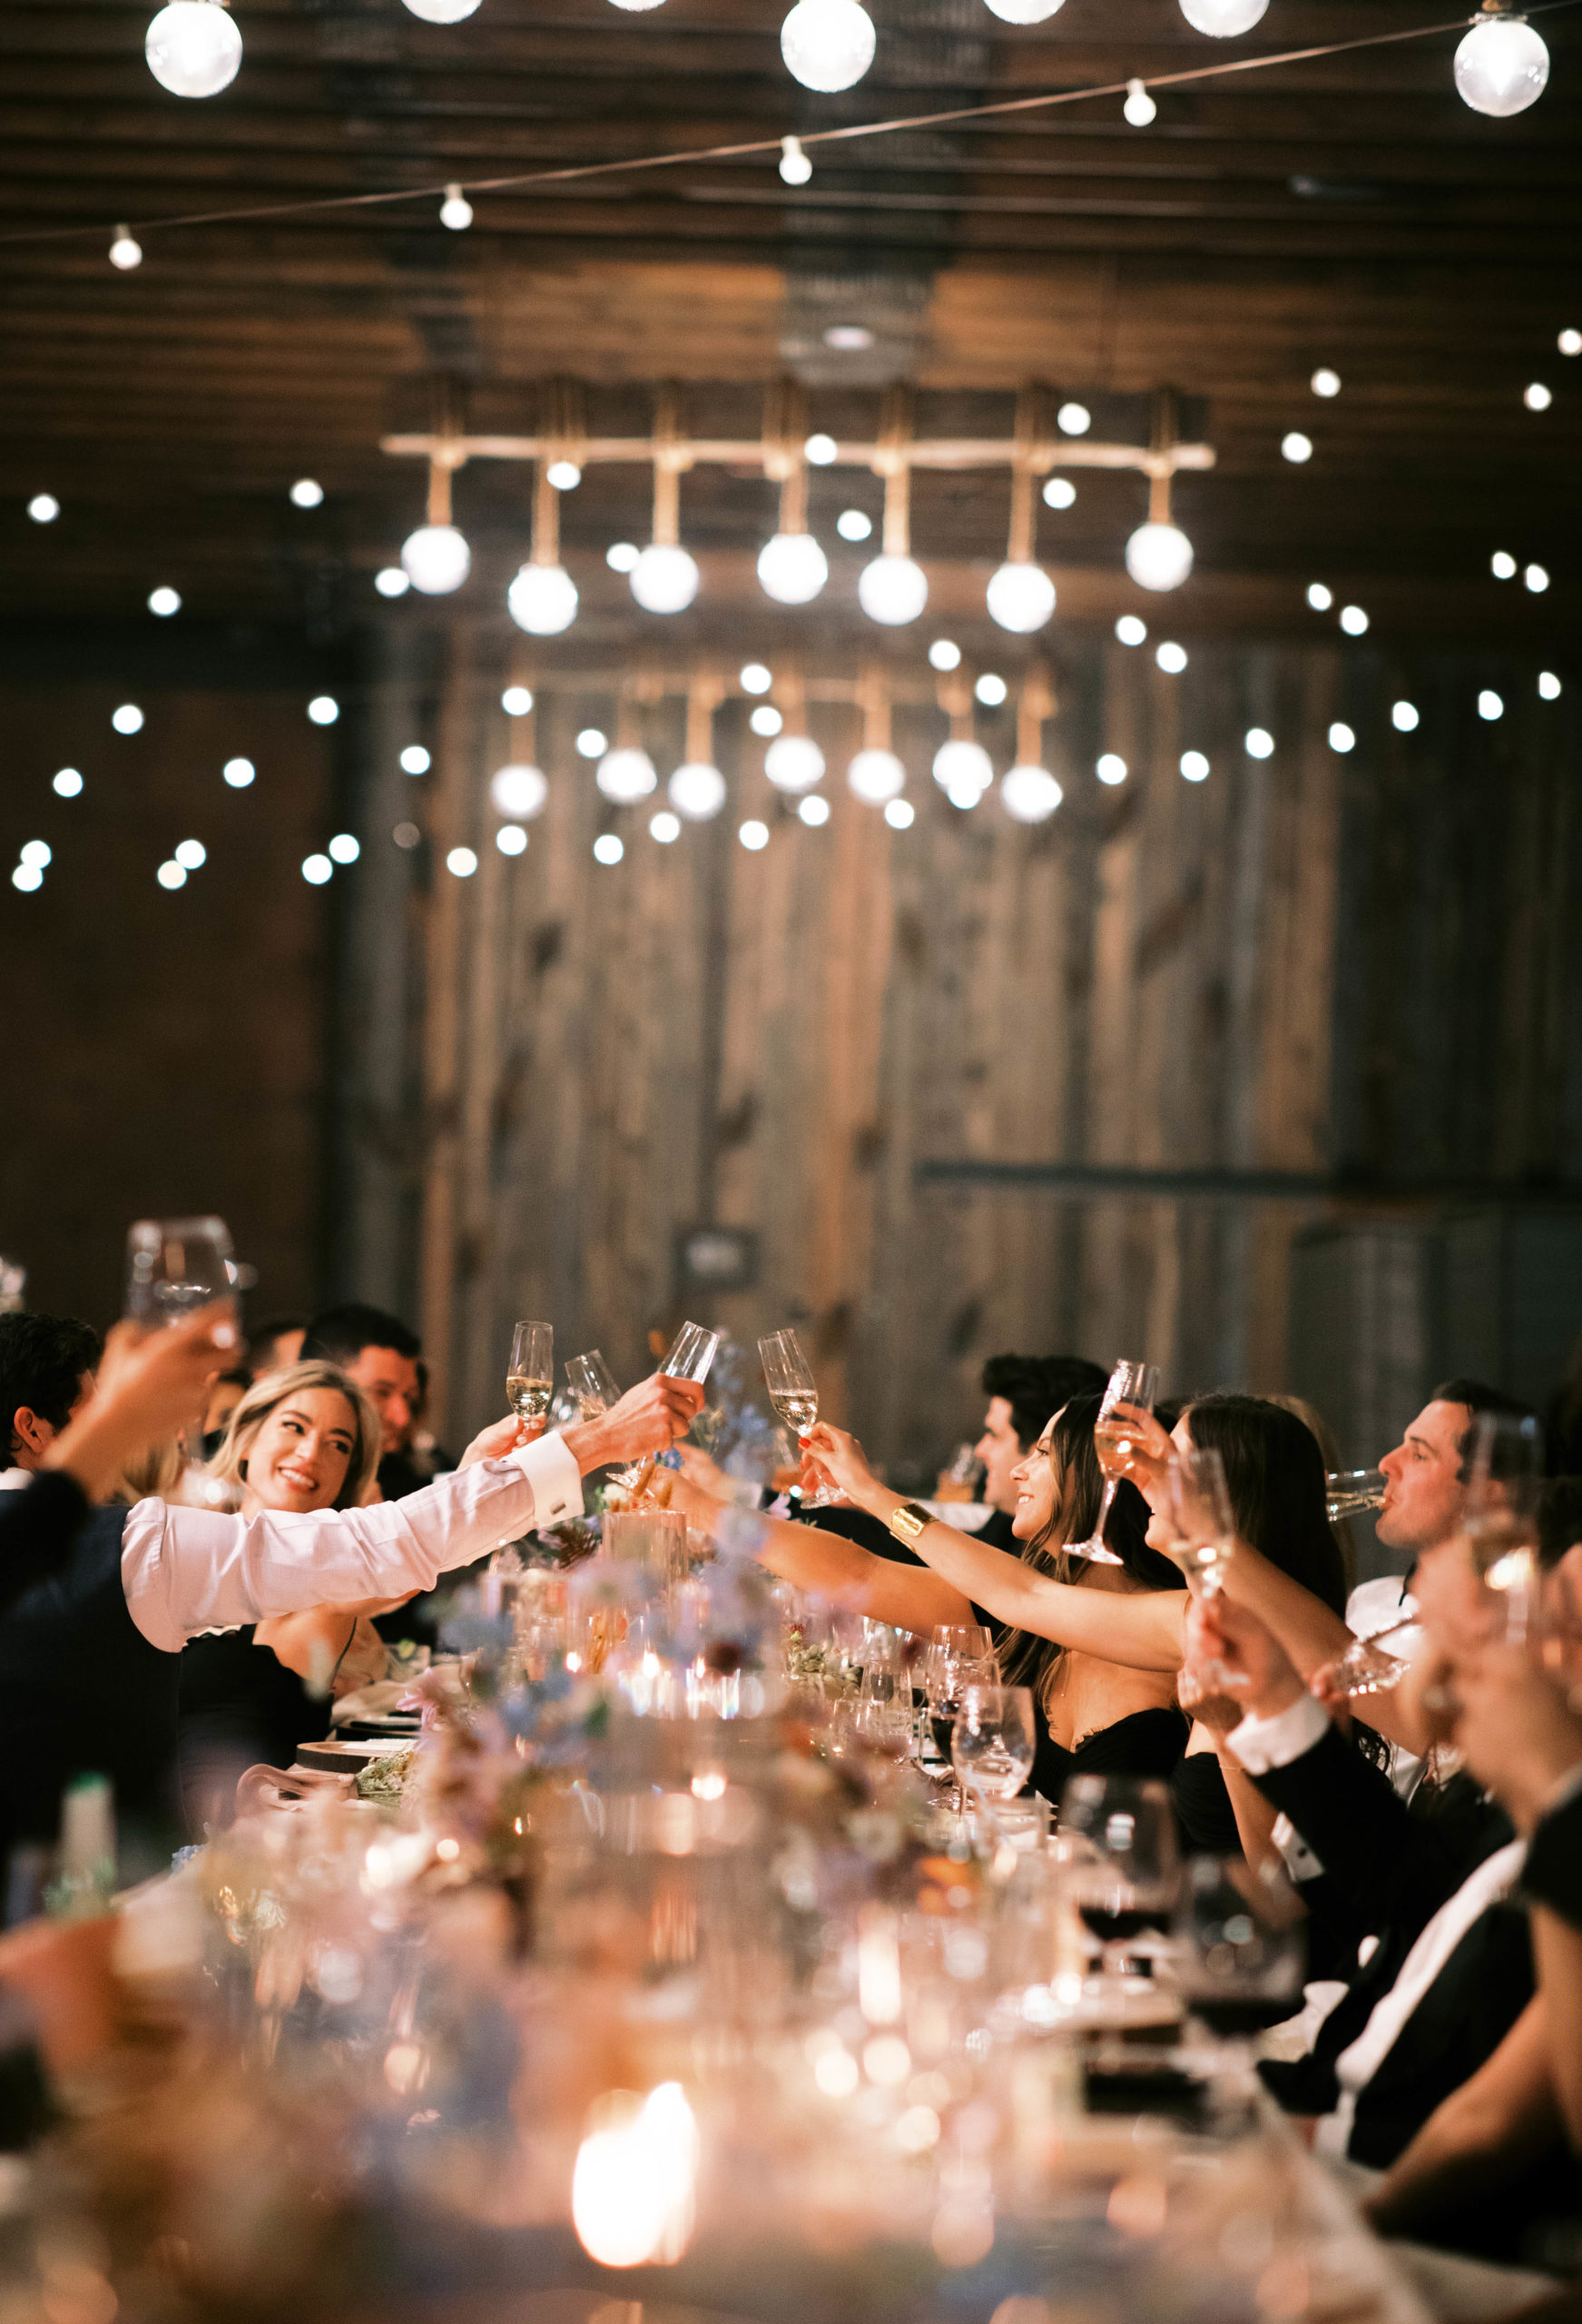 guests raise their glass to toast the bride and groom at their utah blue sky ranch wedding reception. photo by megan robinson photography